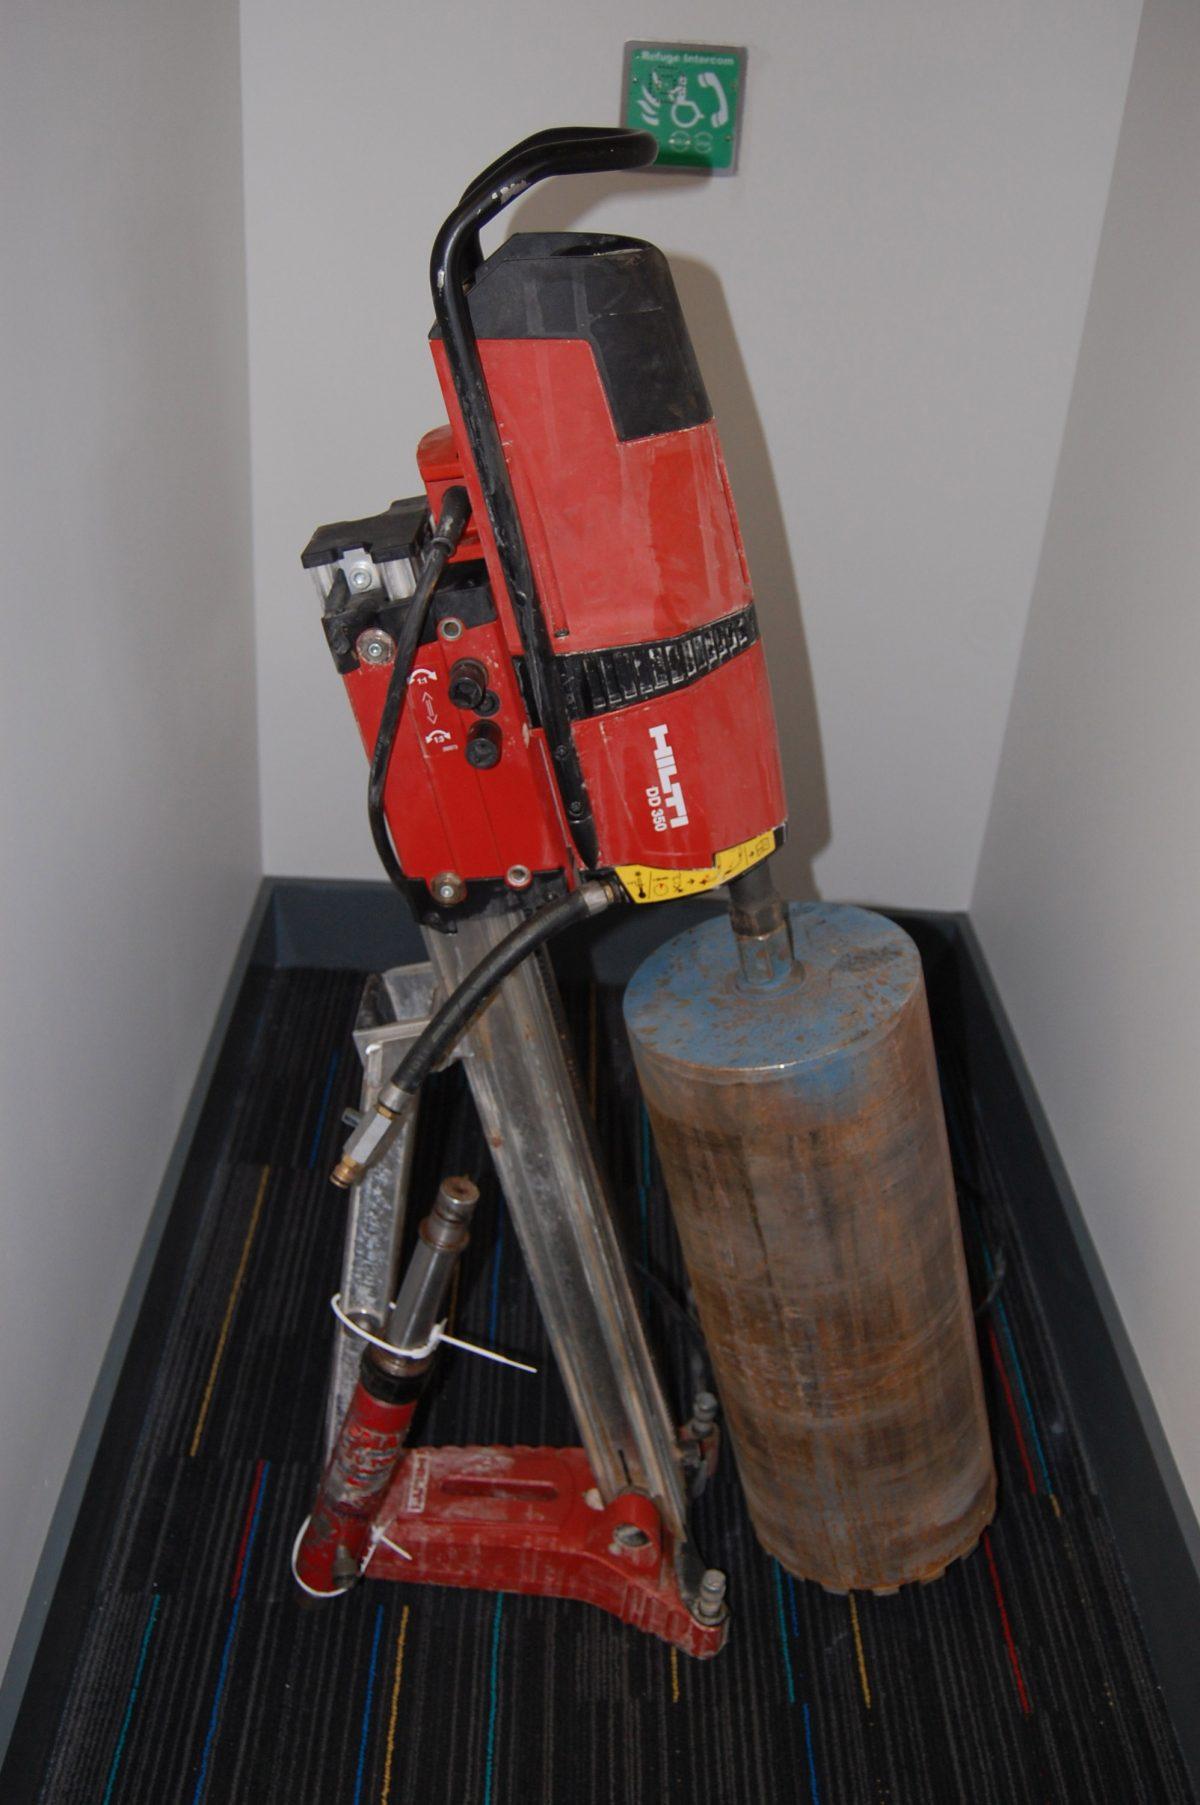 The drill used at Hatton Garden Safe Deposit Limited following the Easter weekend robbery, in London, England in April 2015. (Metropolitan Police via Getty Images)